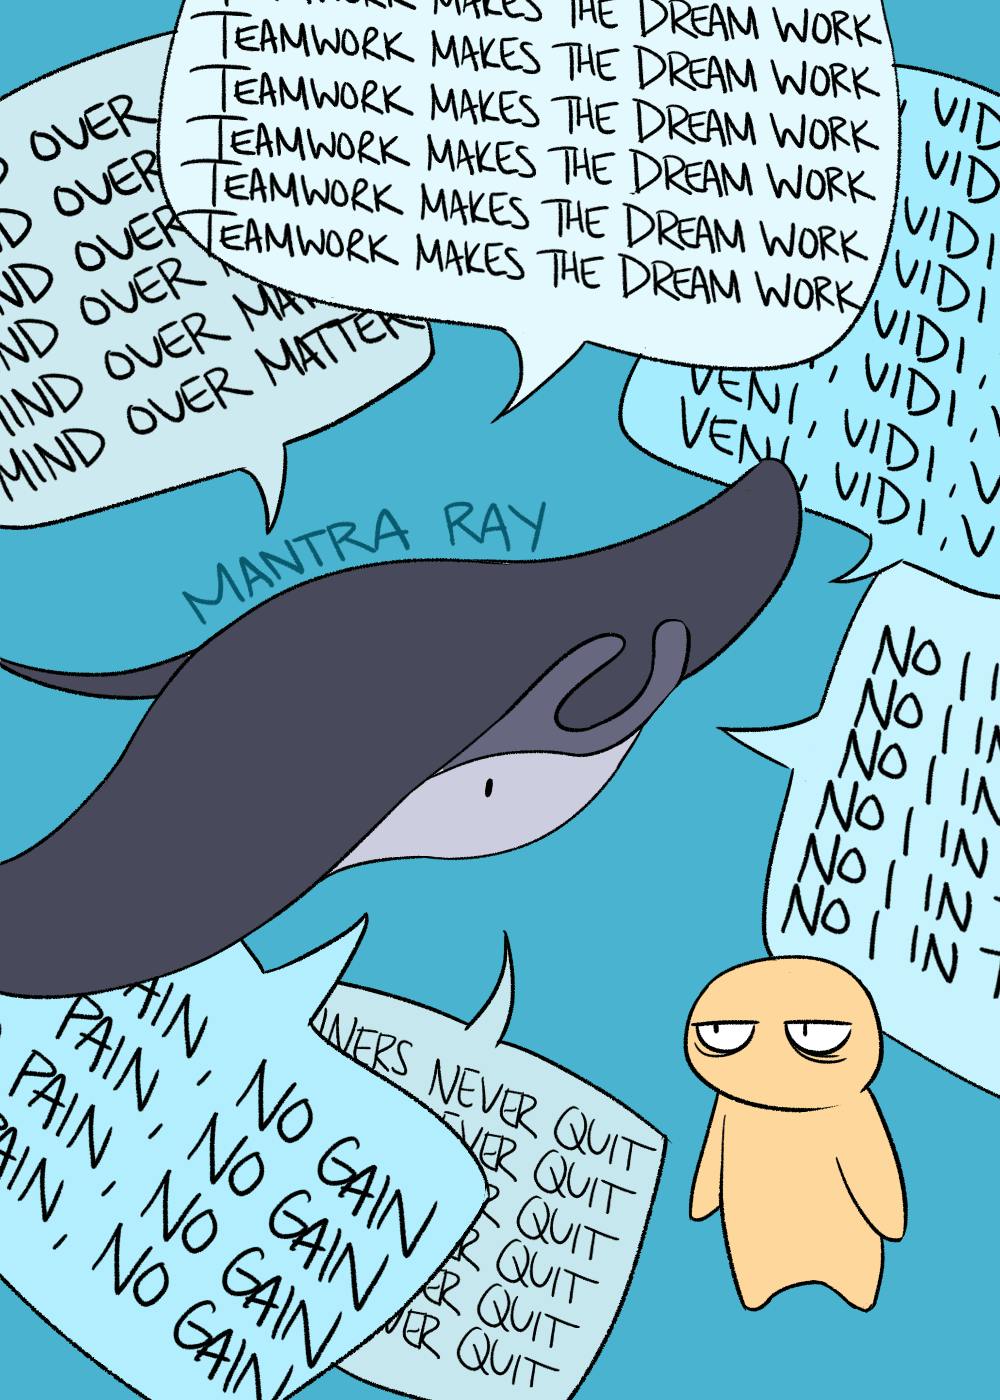 Mantra Rays (Sydney Peng).png